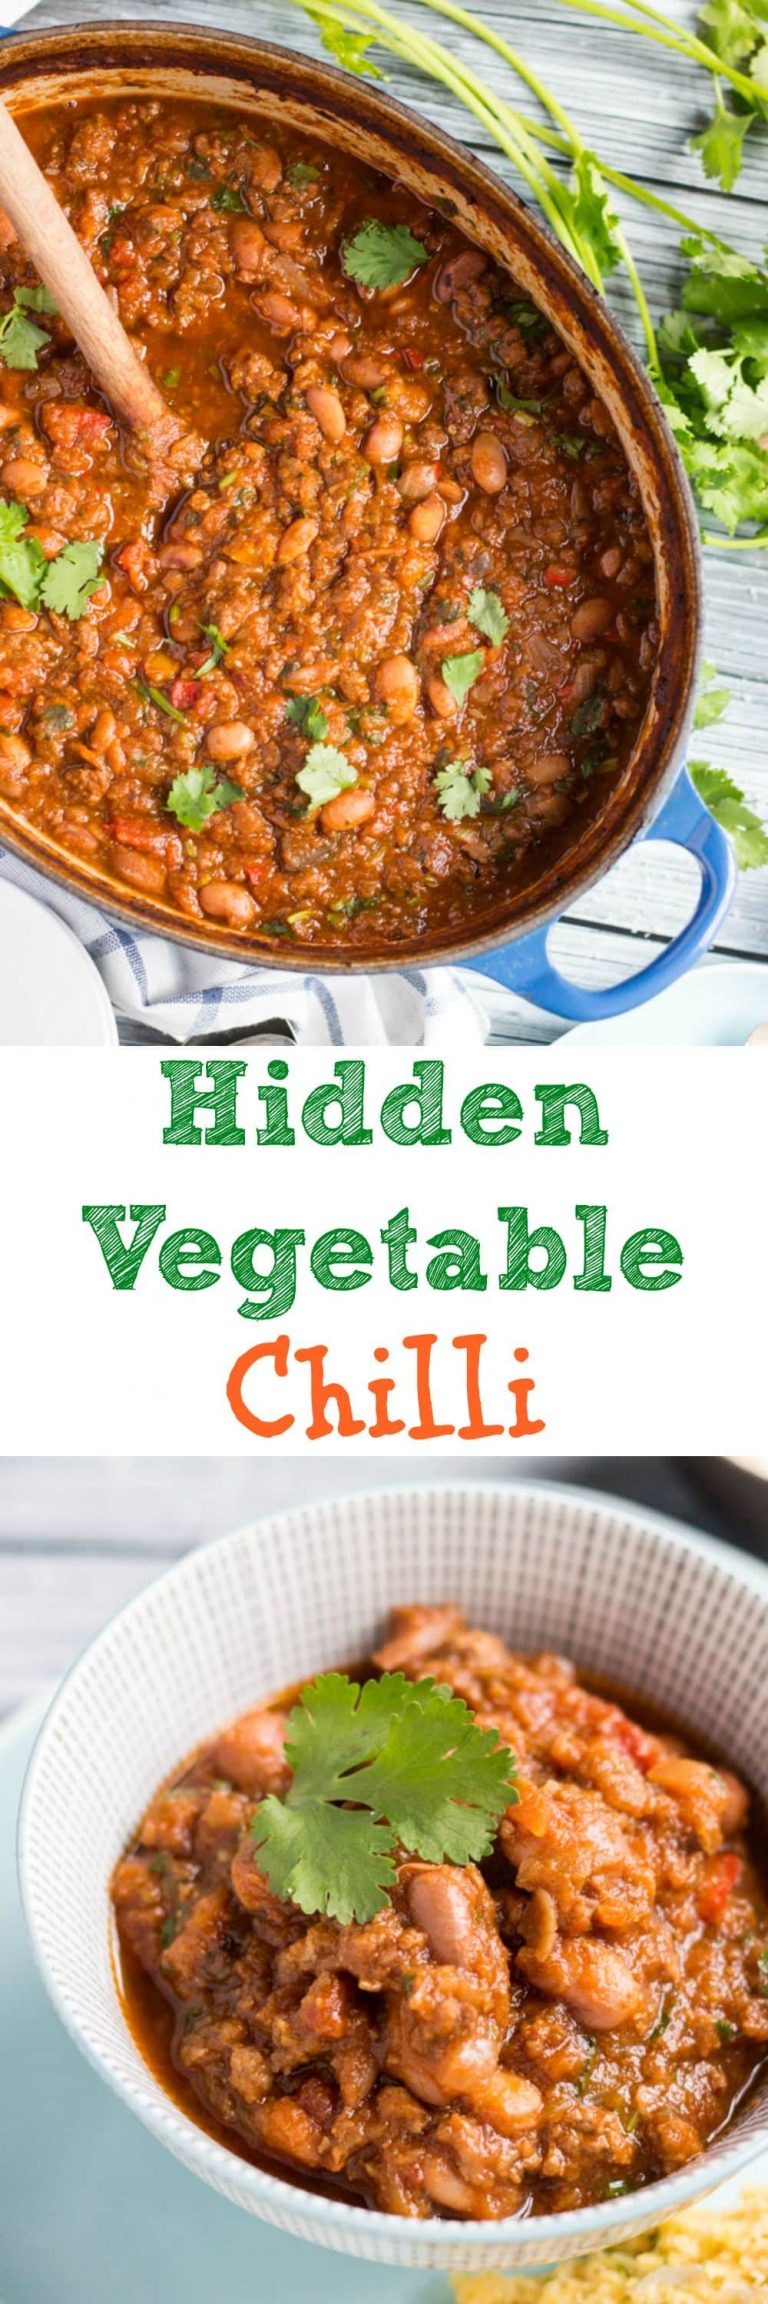 Oven Roasted Chilli with Hidden Vegetables